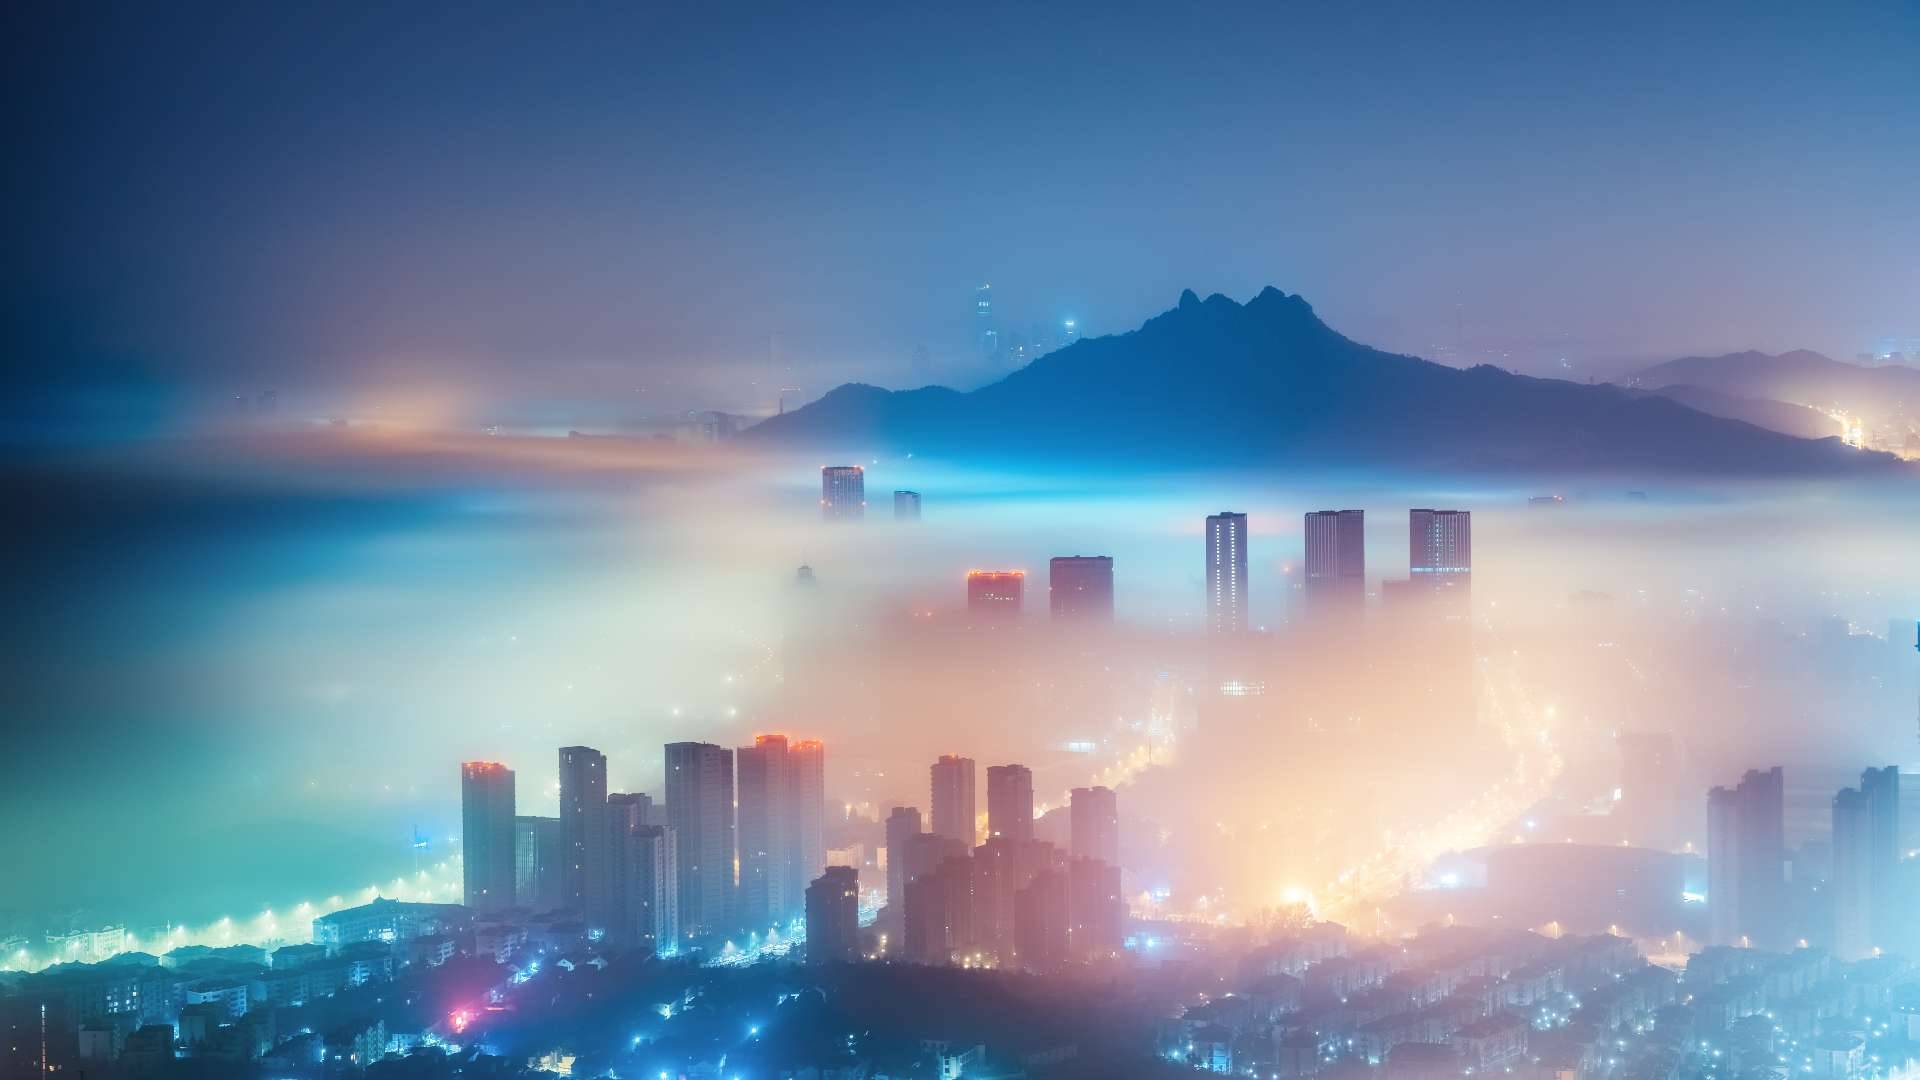 Light Pollution in Urban Areas is A New Threat to Human Health